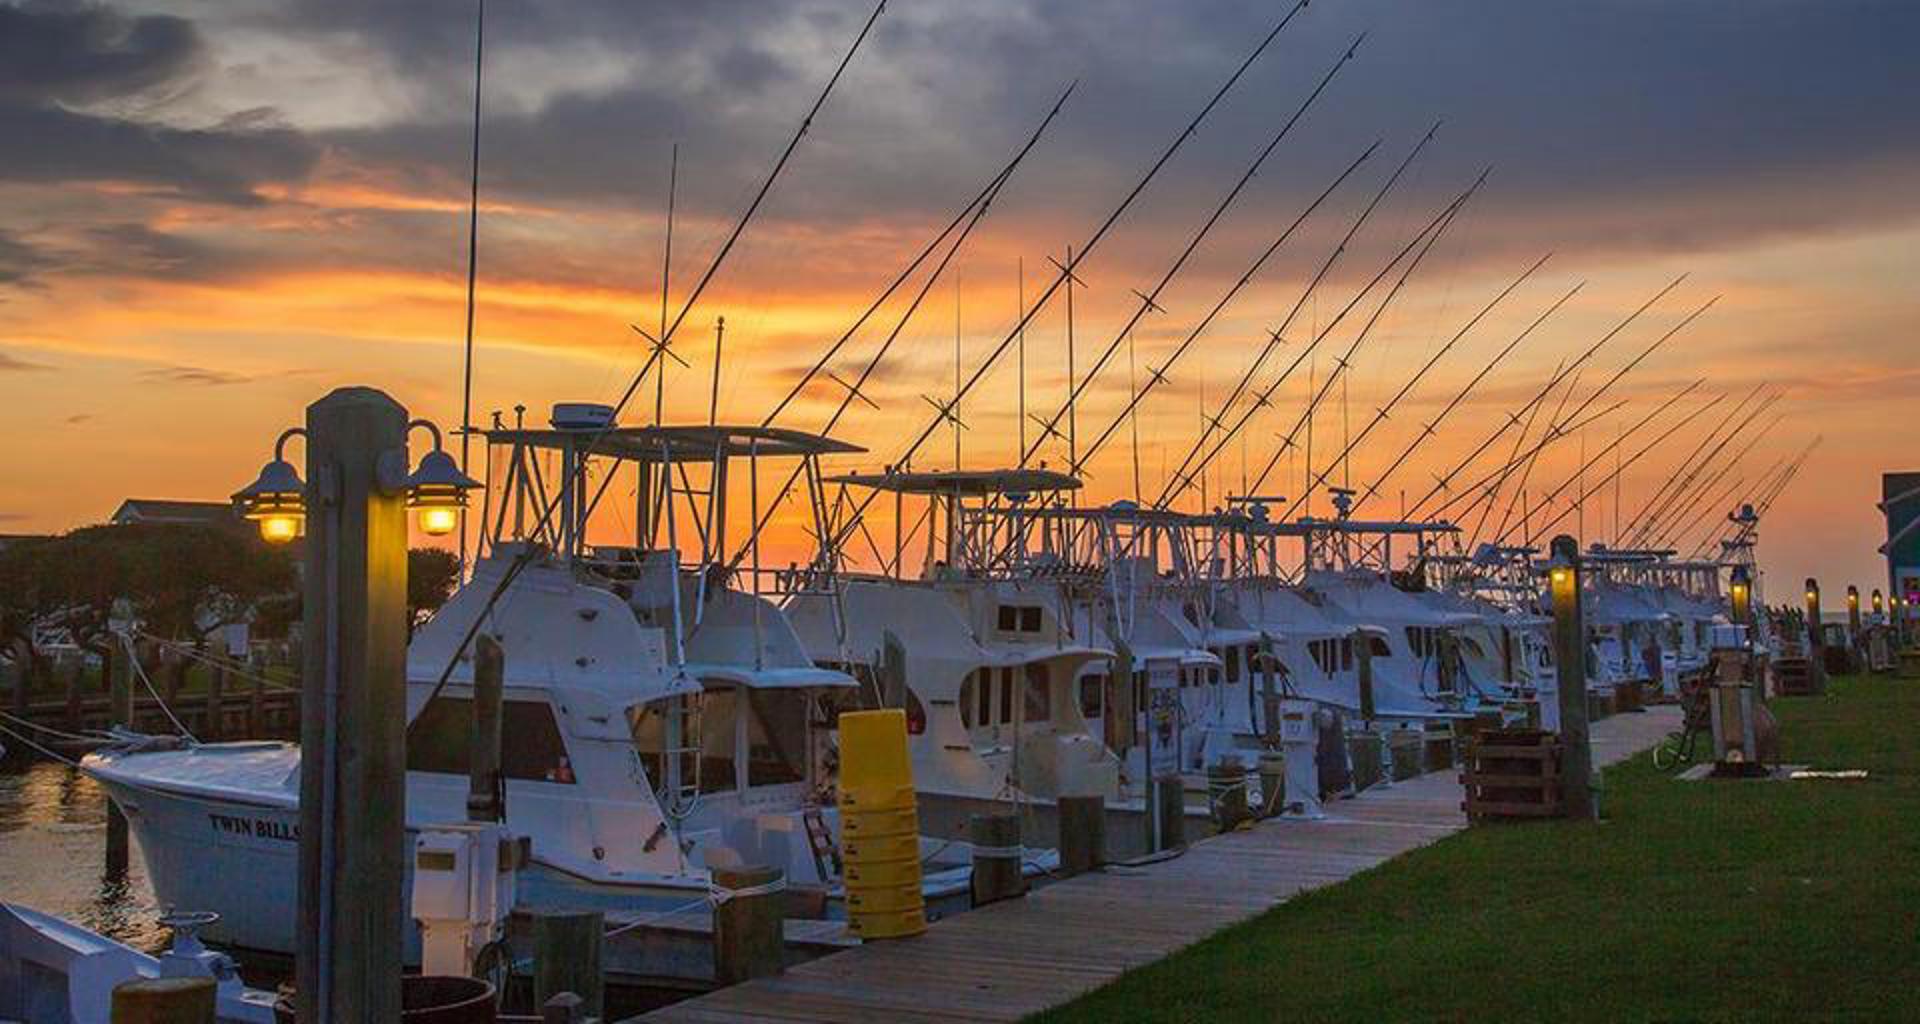 Row of Hatteras-based off-shore charter fishing boats line the dock at Teach's Lair Marina under an orange pre-dawn sky